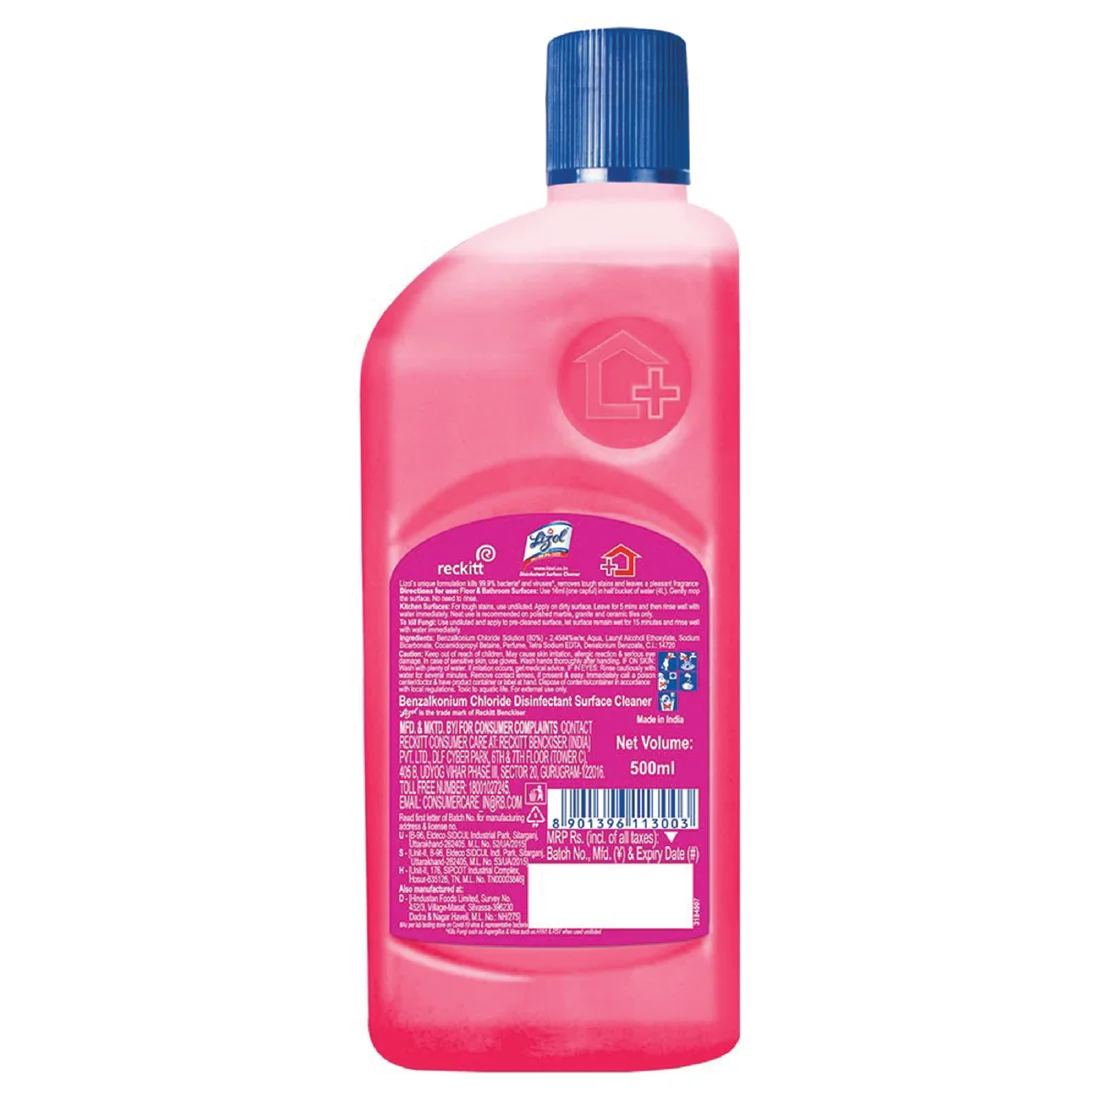 Lizol Disinfectant Surface Cleaner, Floral, 500ml